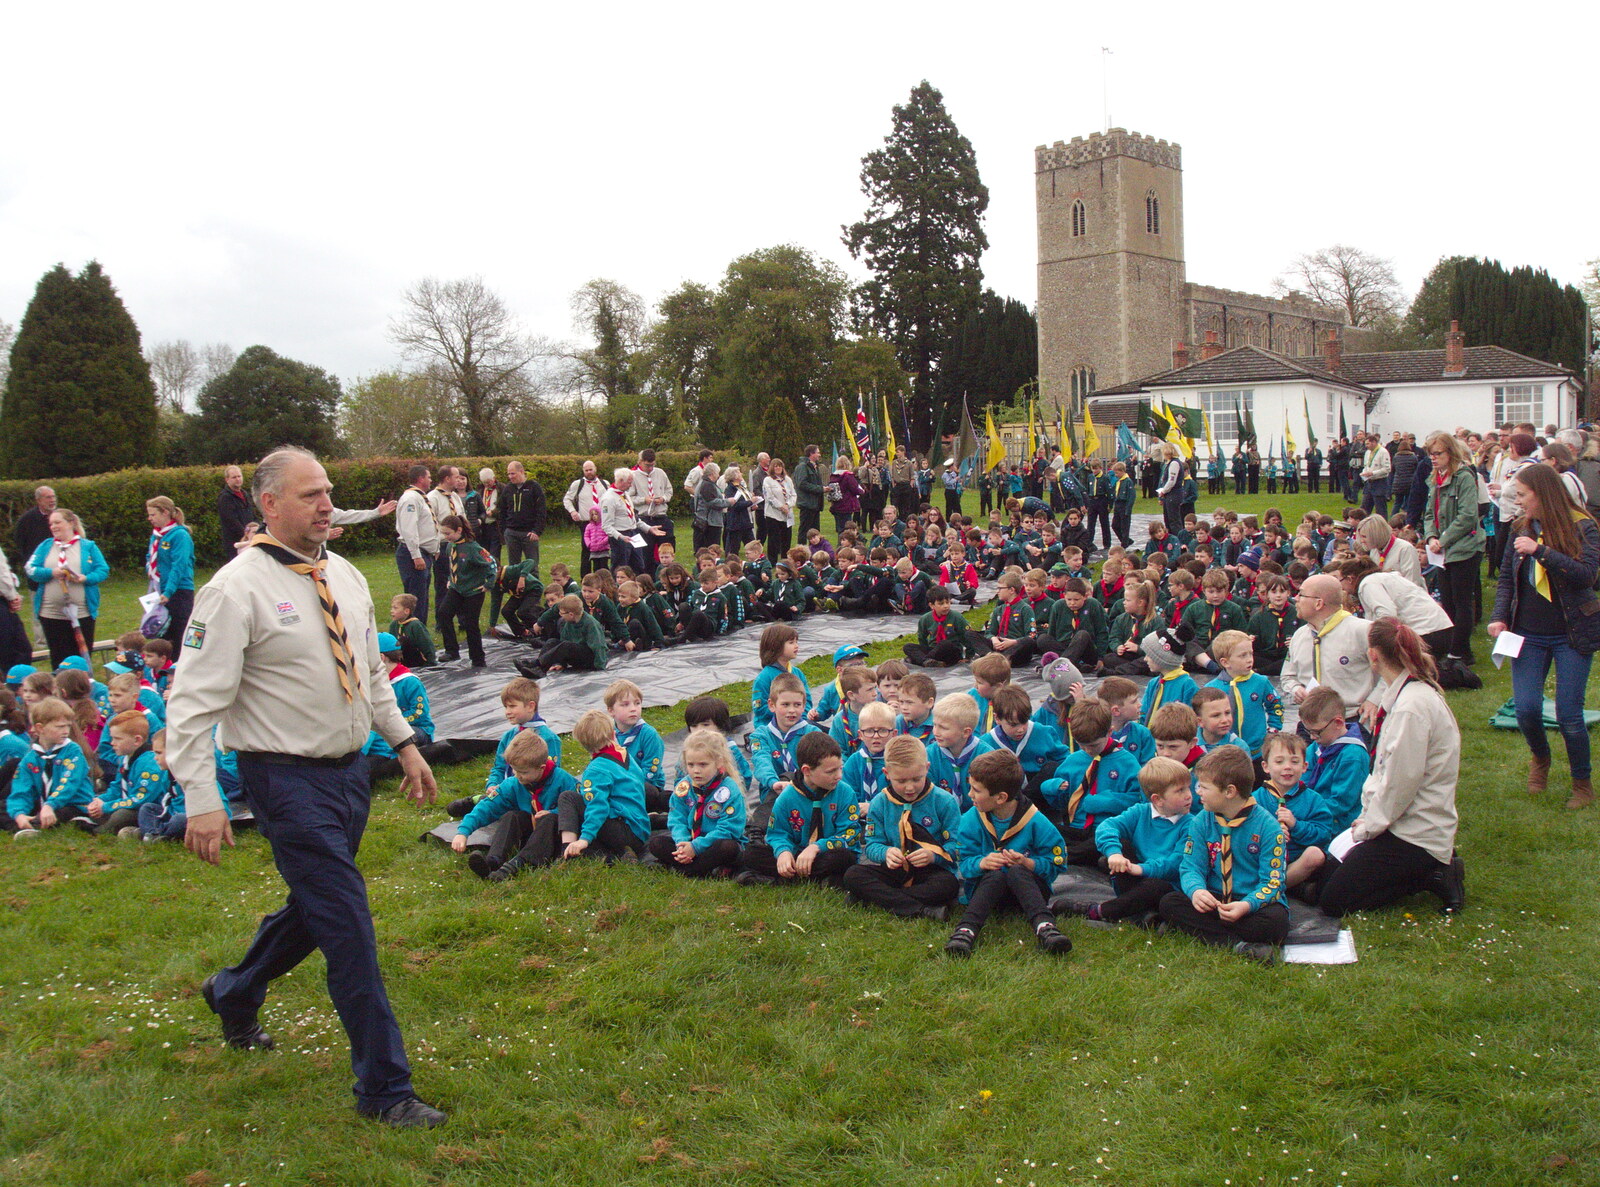 Scouts and Beavers sit down for a presentation from A St. George's Day Parade, Dickleburgh, Norfolk - 28th April 2019